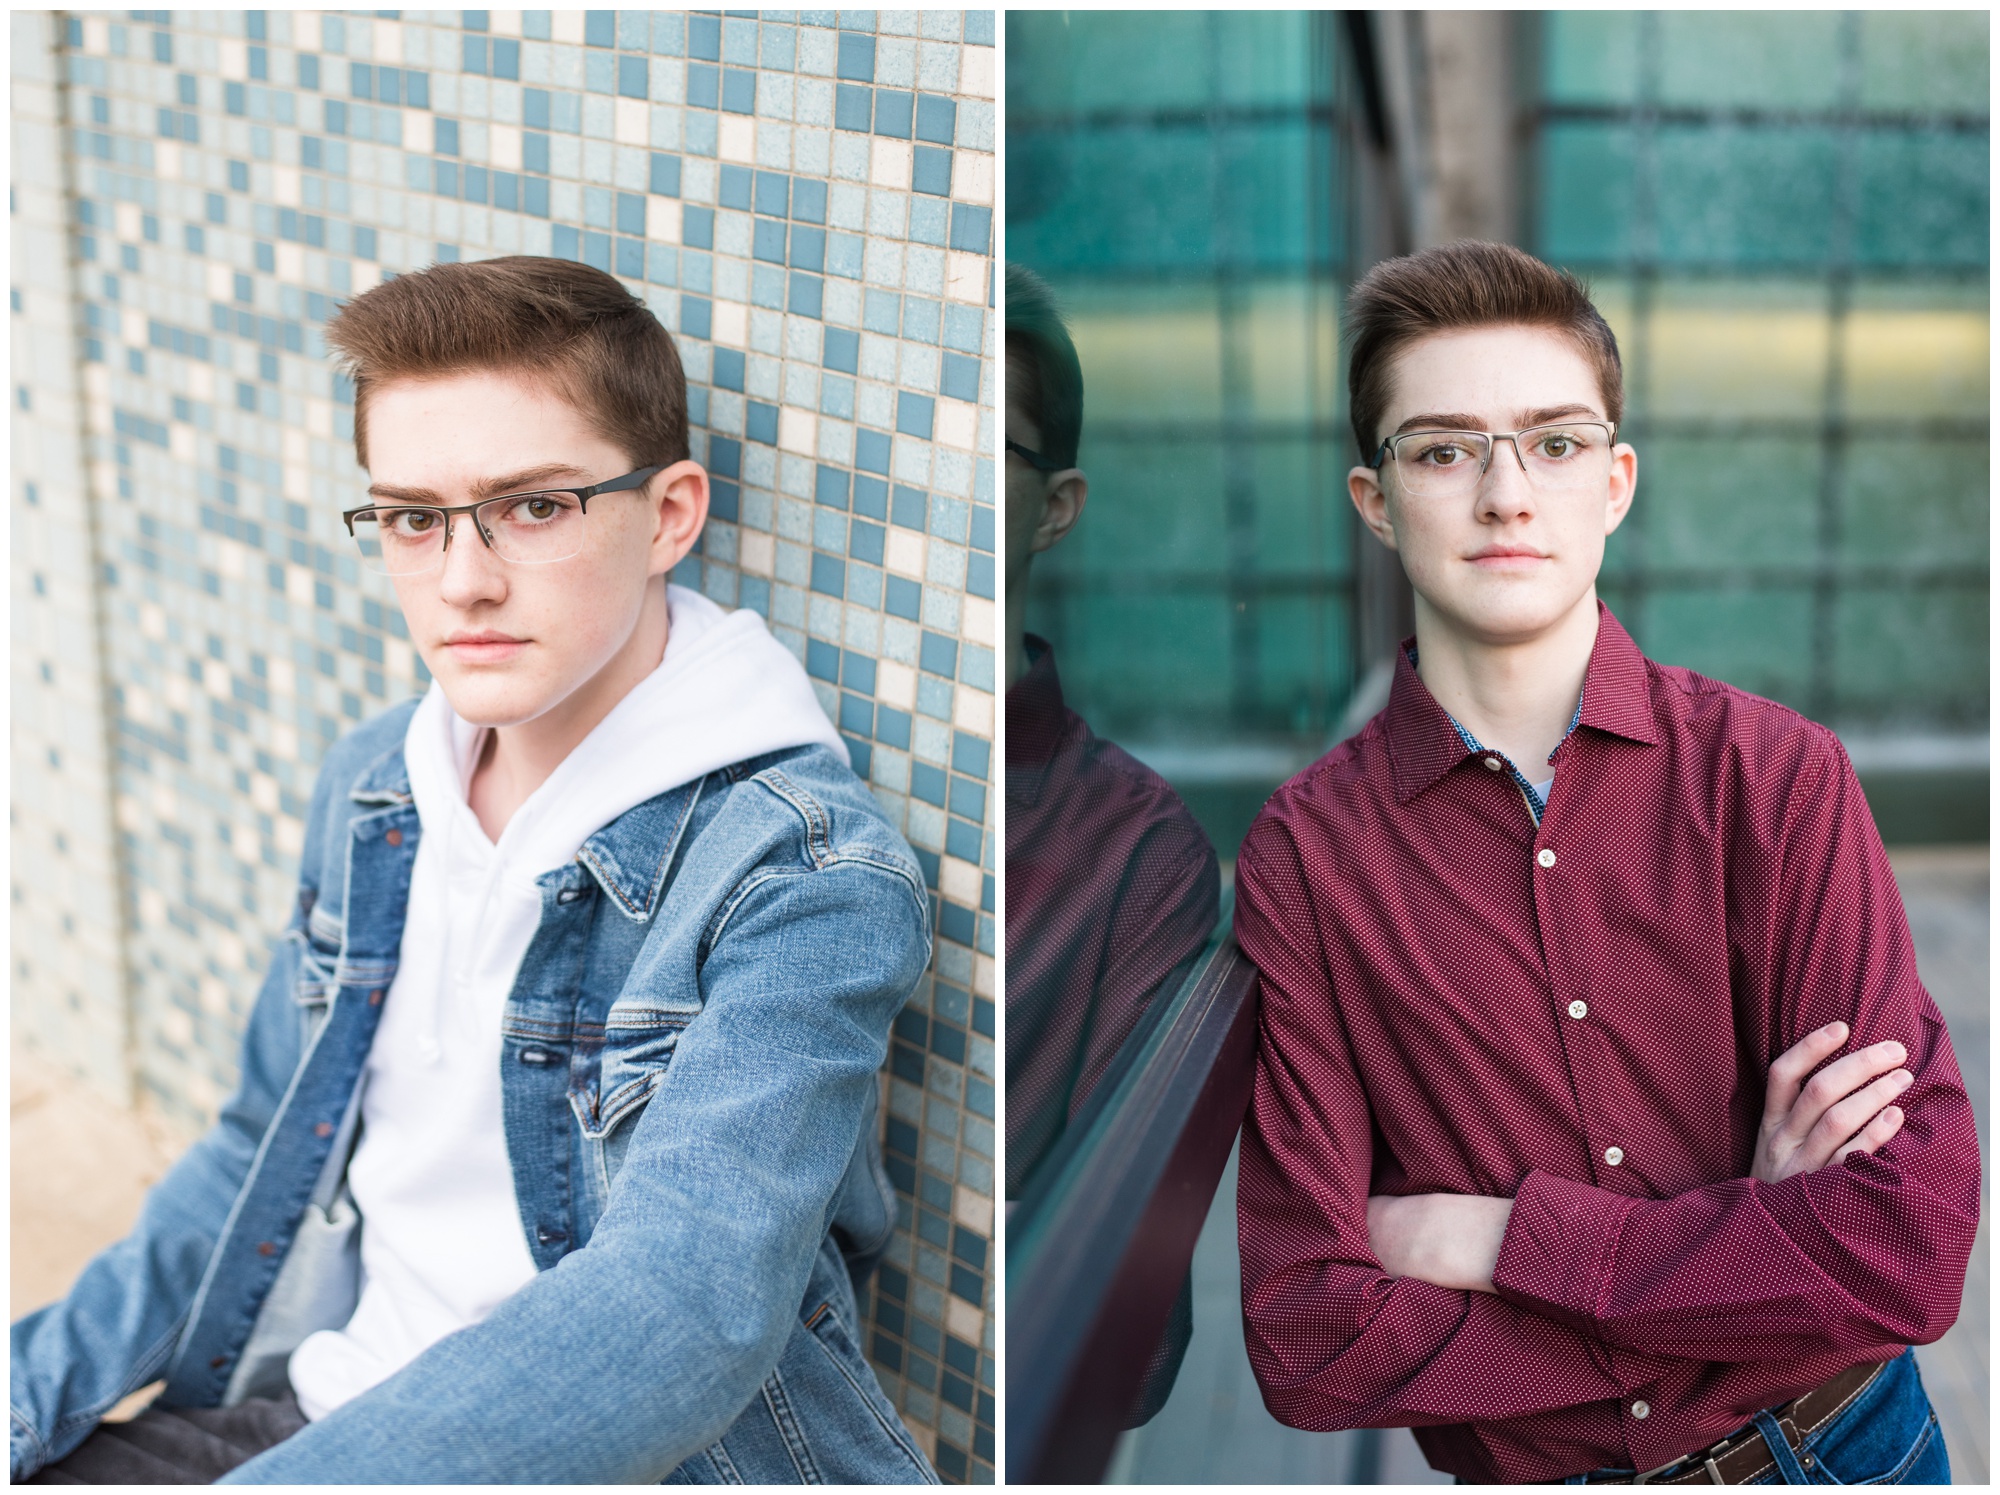 Downtown Fort Worth Senior Session | Downtown Fort Worth | Fort Worth Senior Photographer | Lauren Grimes Photography